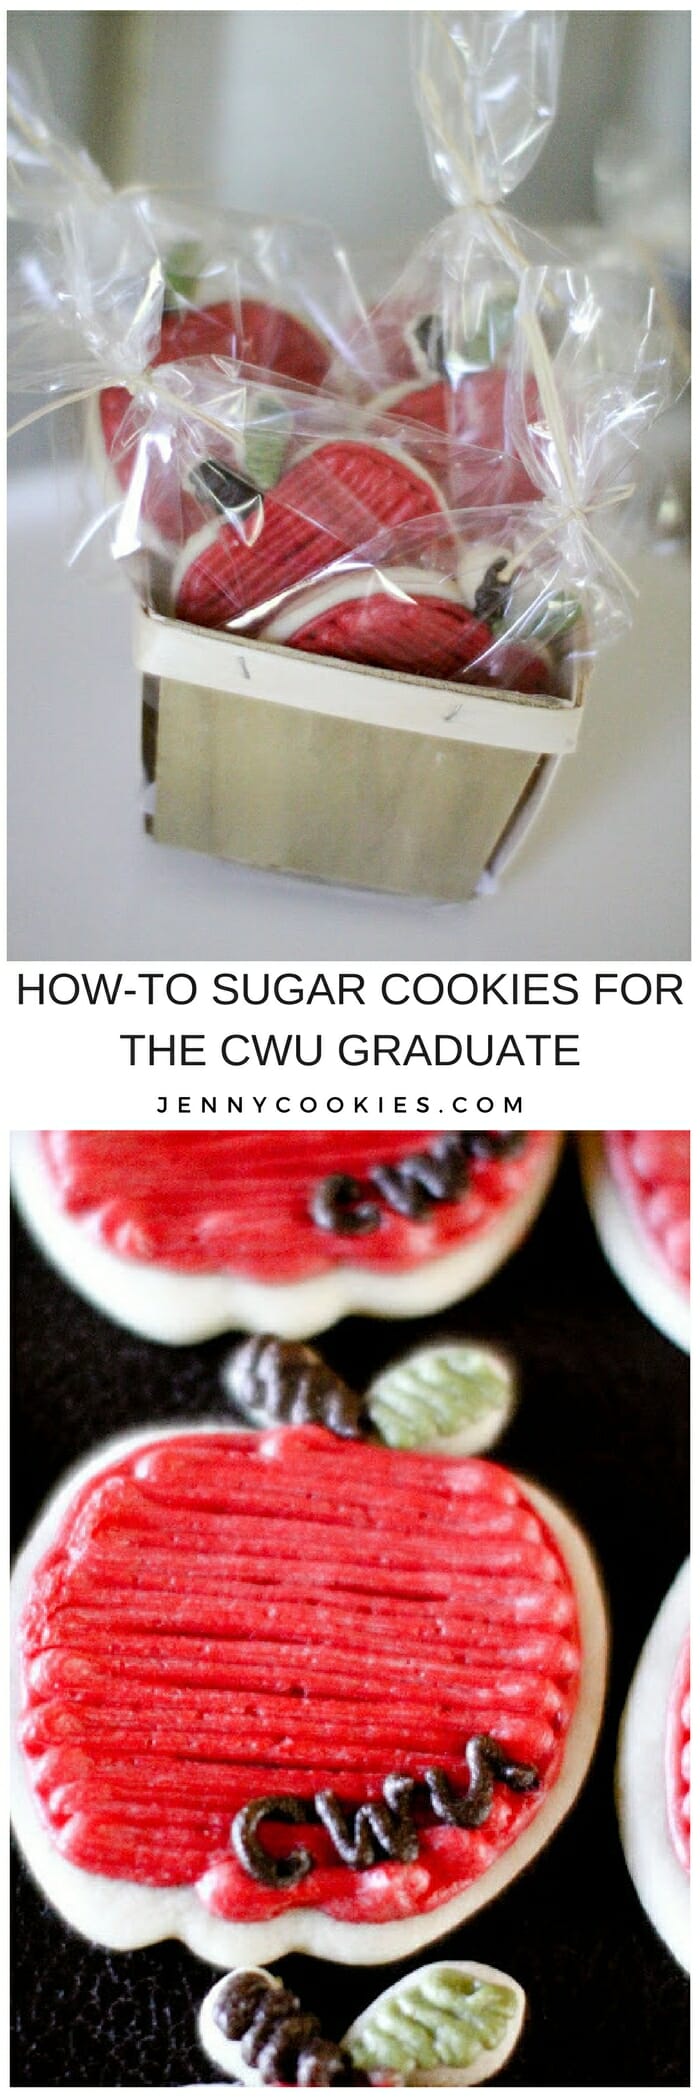 For the CWU graduate